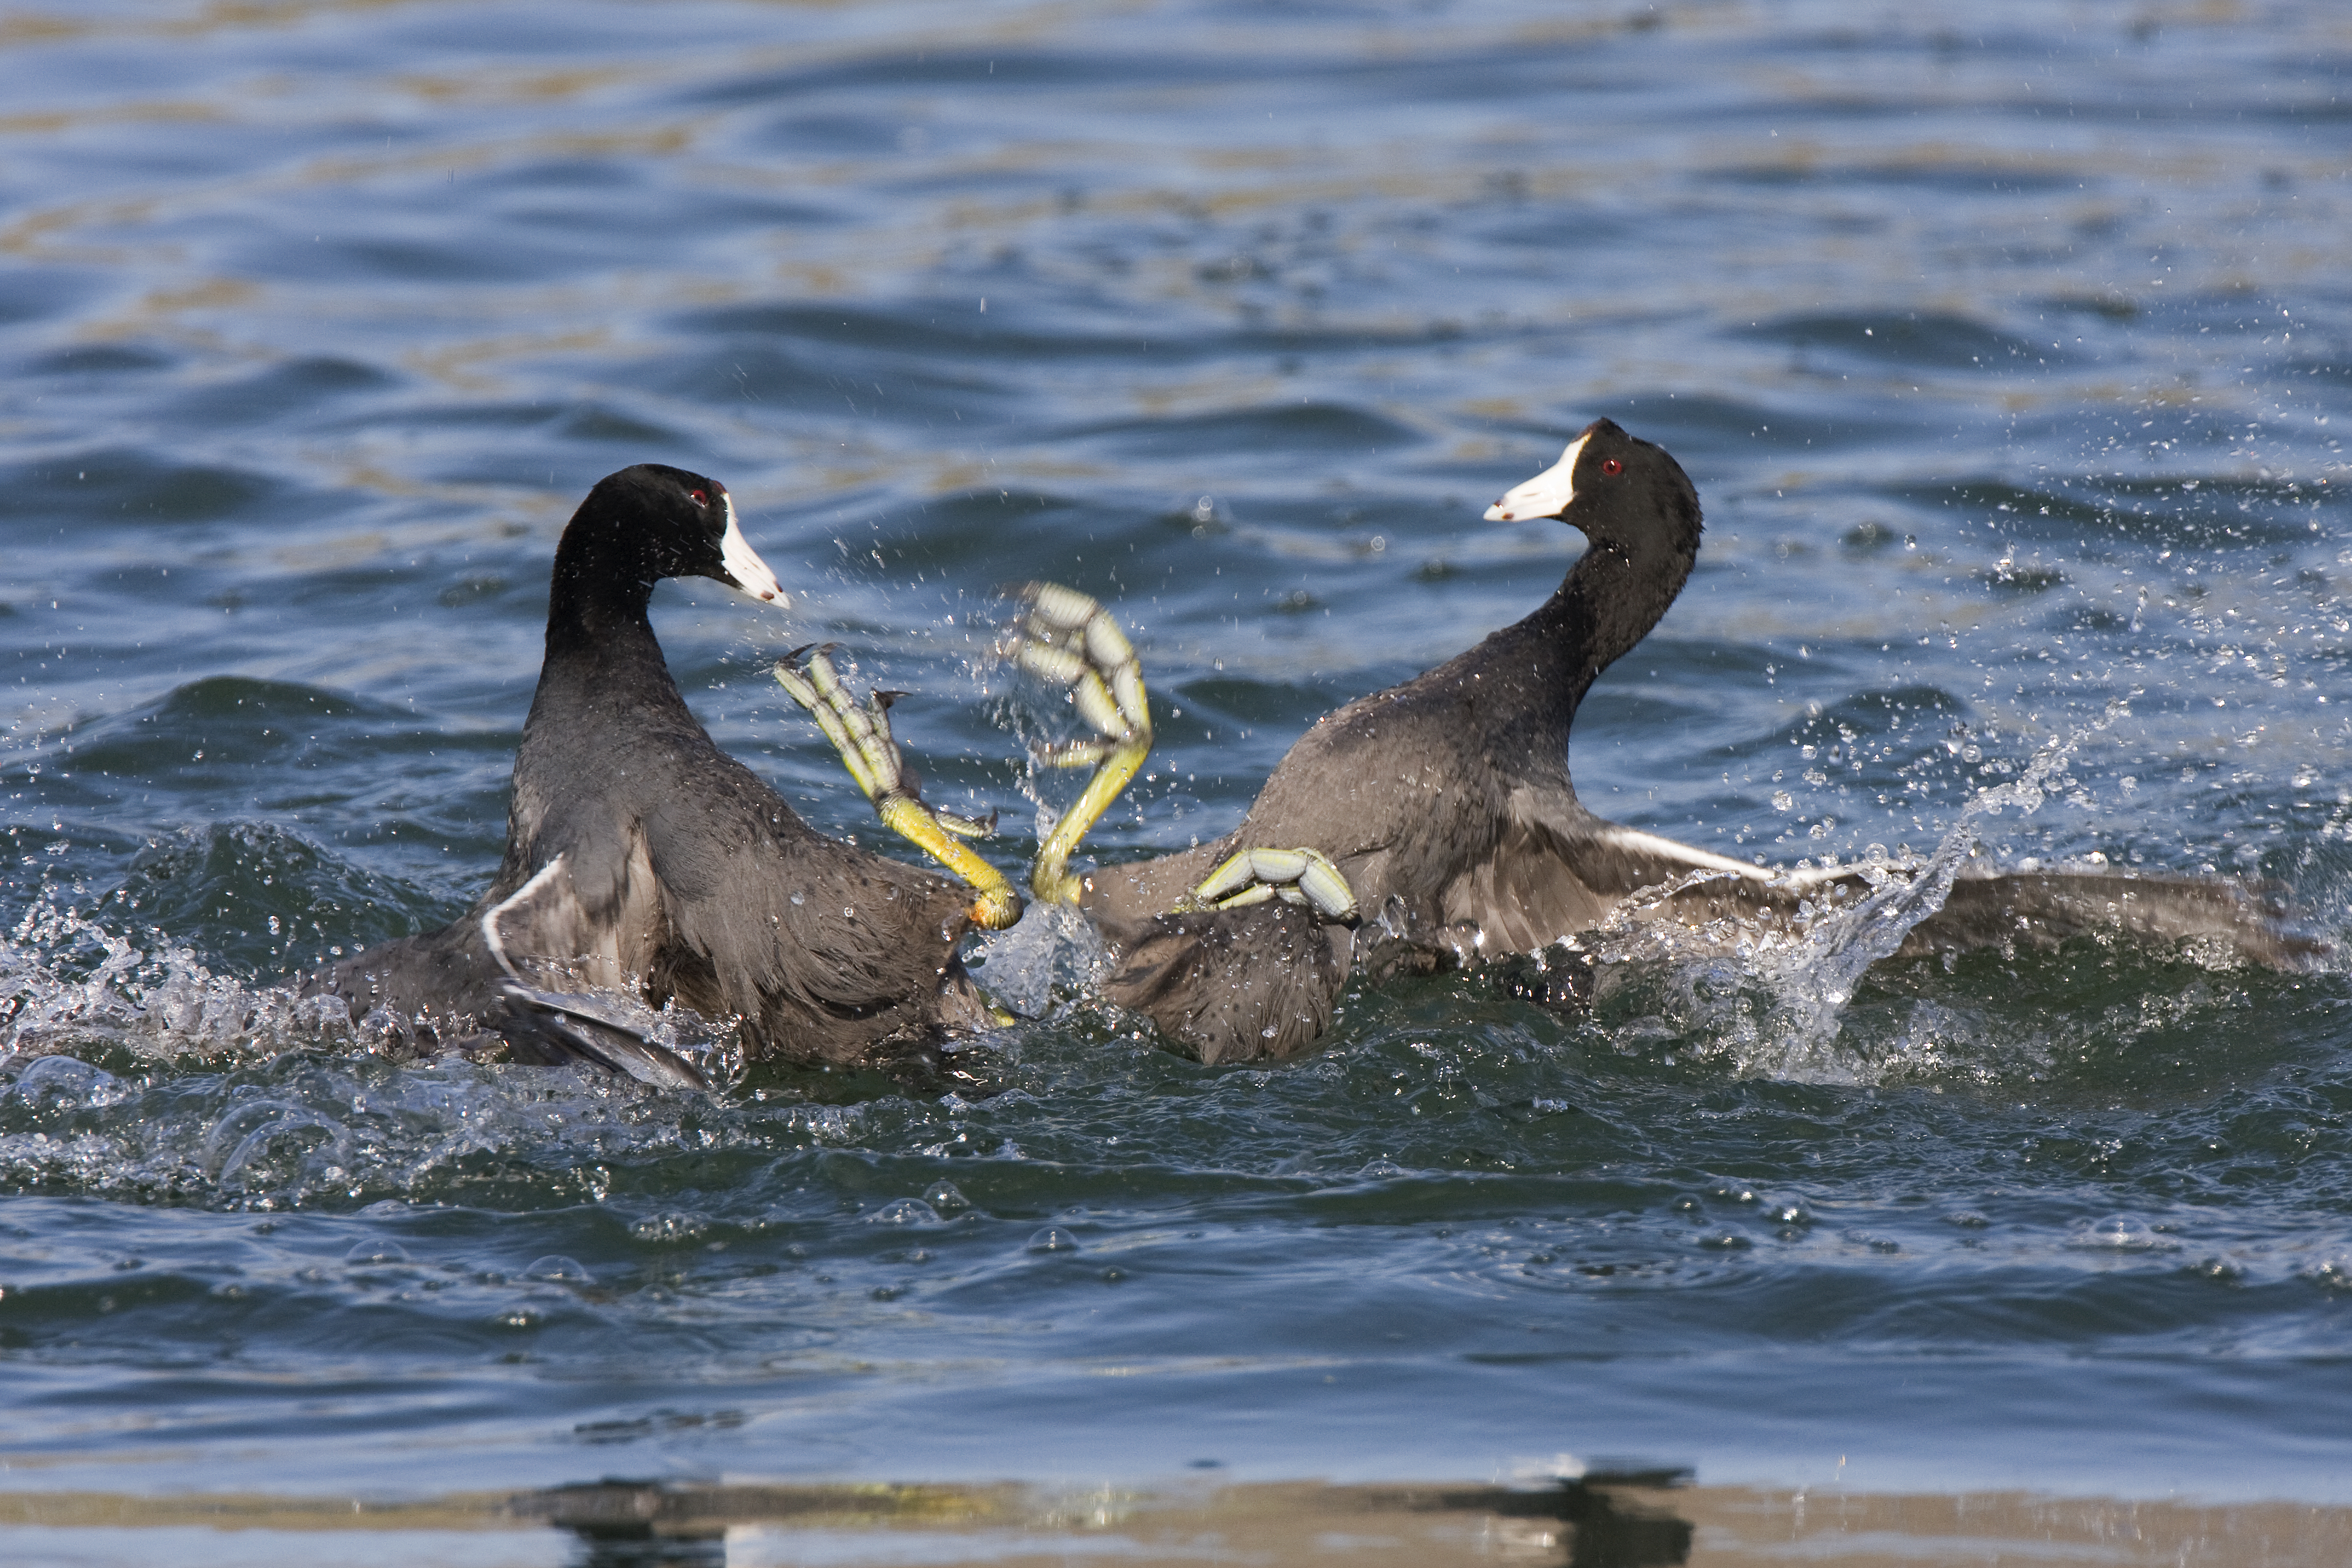 File:American Coots fighting.jpg - Wikimedia Commons